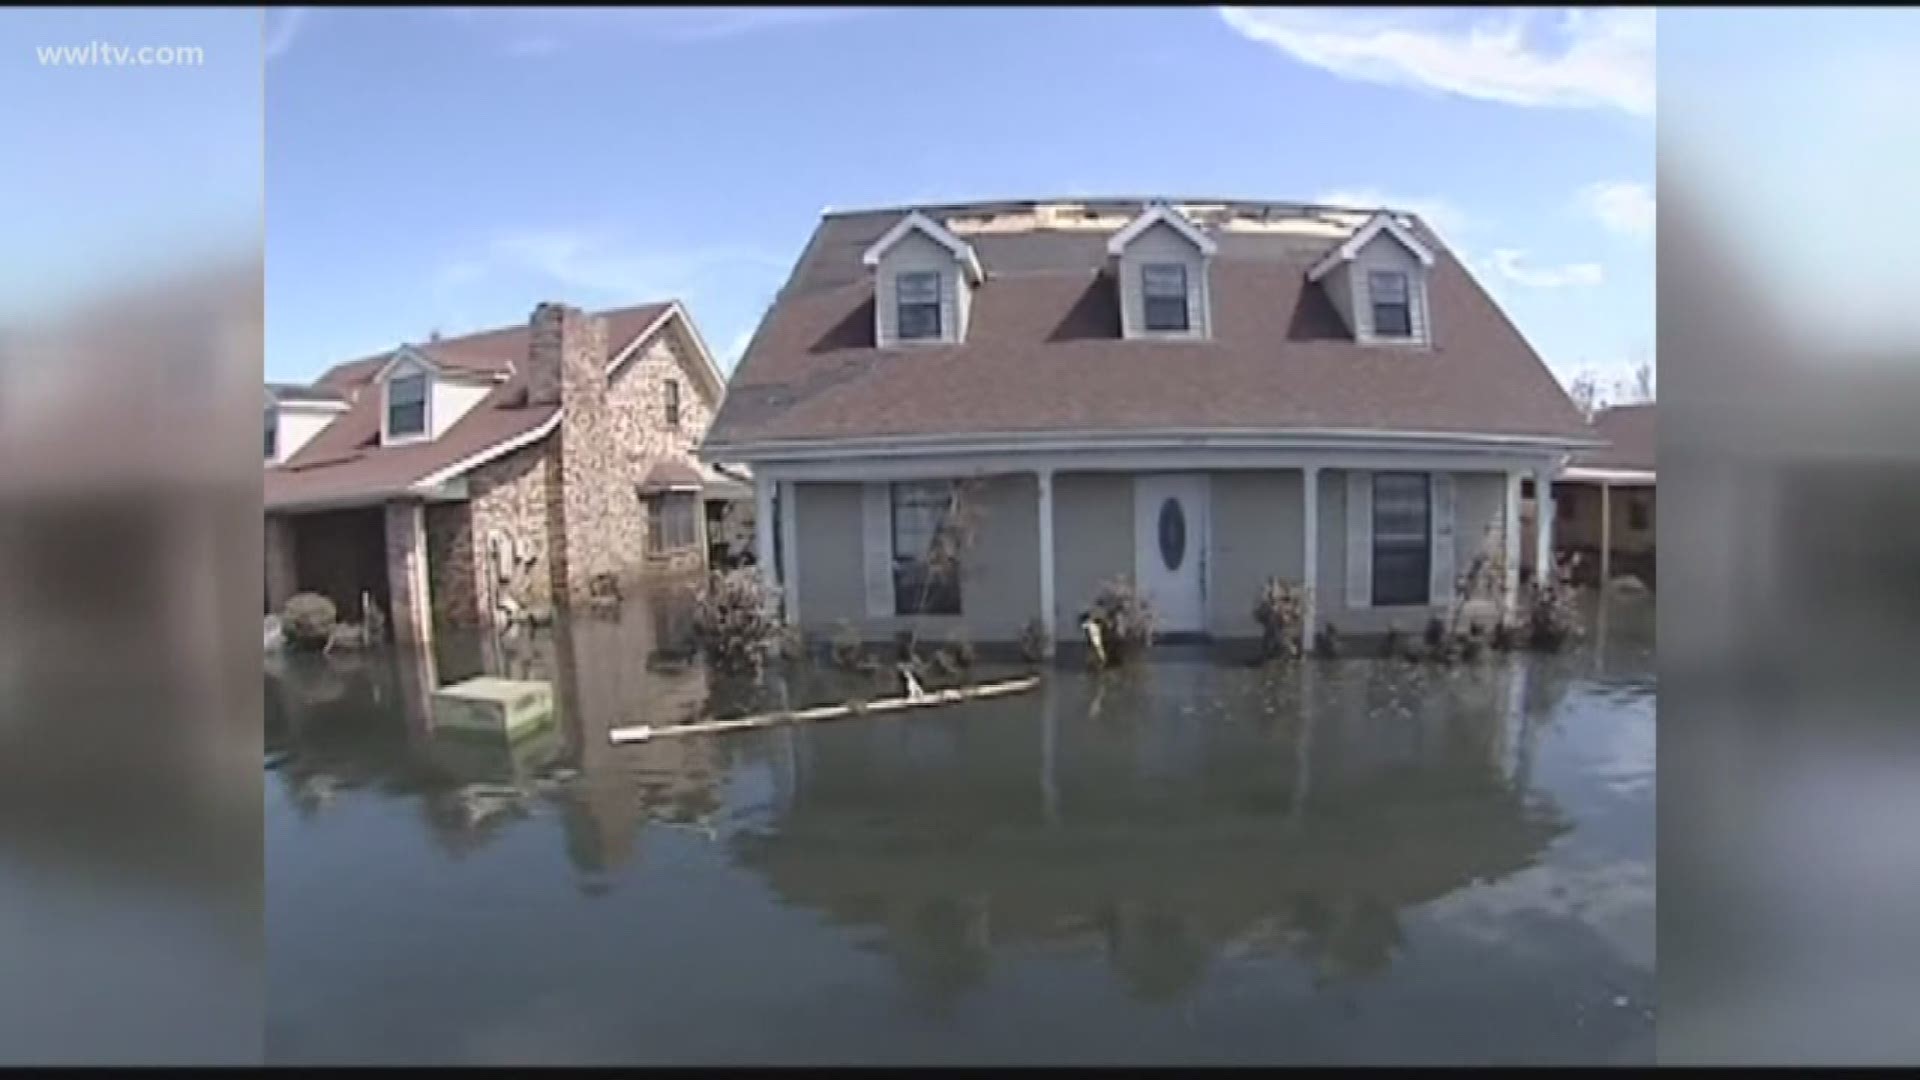 Flood insurance premiums could rise and property values fall under a plan to change the way risk is calculated under the National Flood Insurance Program (NFIP).